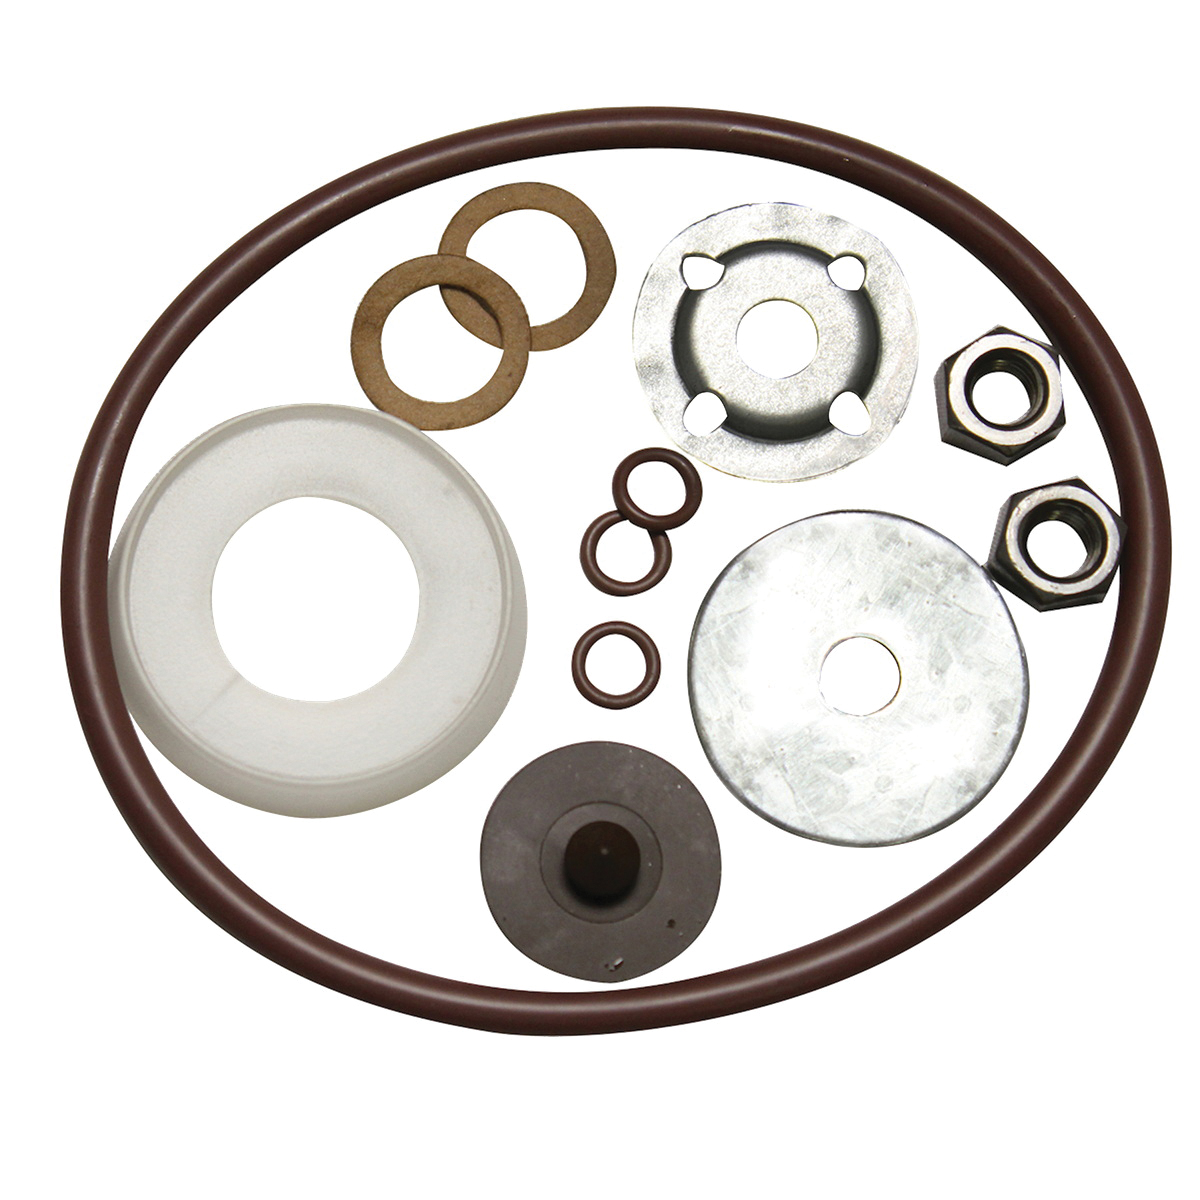 CHAPIN 6-1945 Repair Kit, Nitrile, For: 2121, 2122, 2123, 2235 and 2236 Compression Sprayers